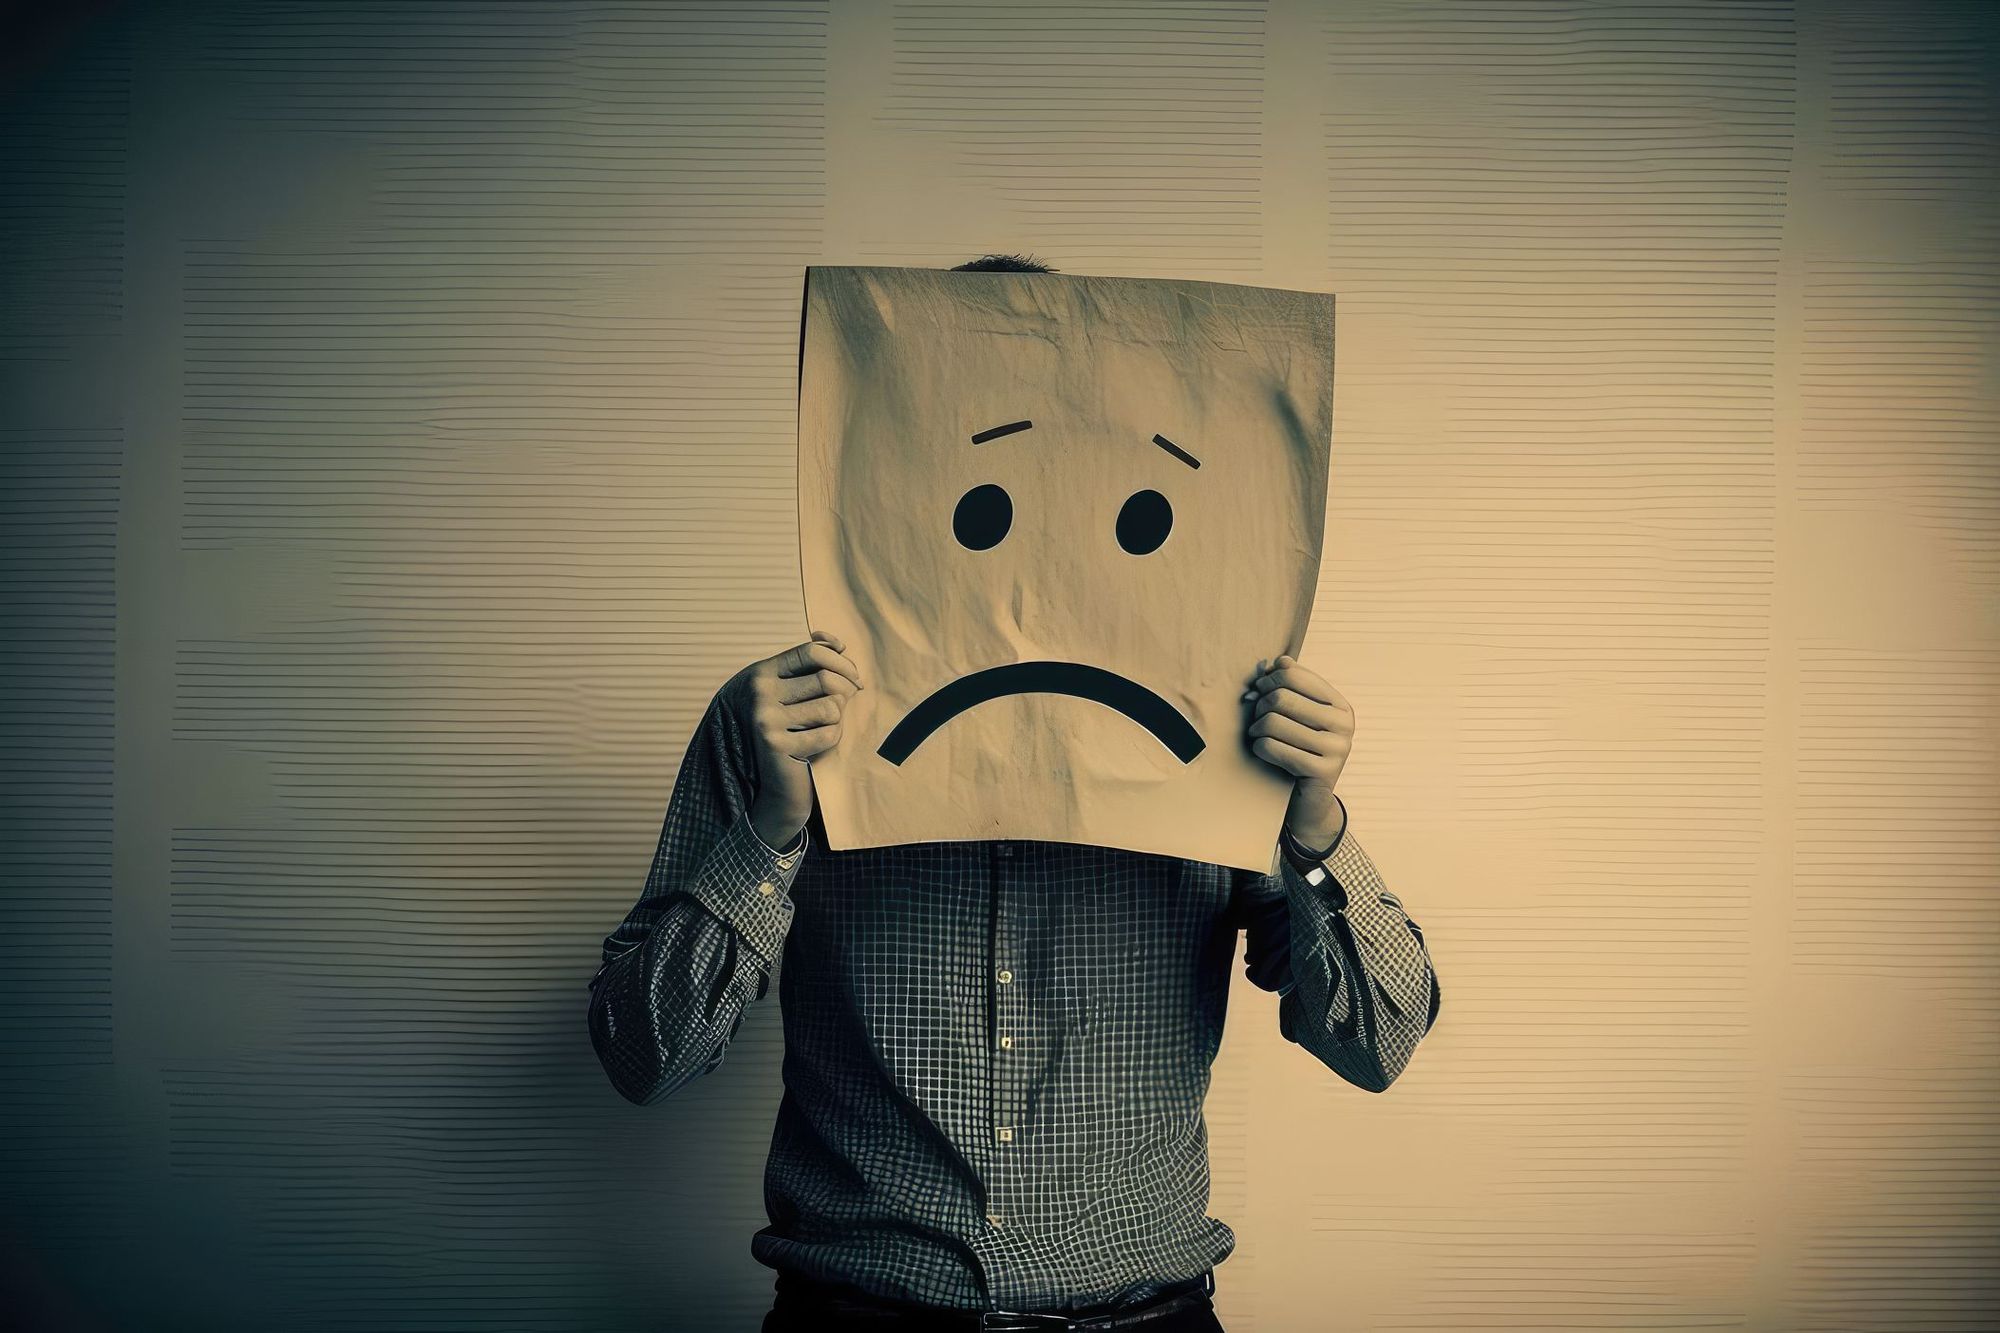 A man holding a large paper bag with a sad face emoji printed on it in front of his head